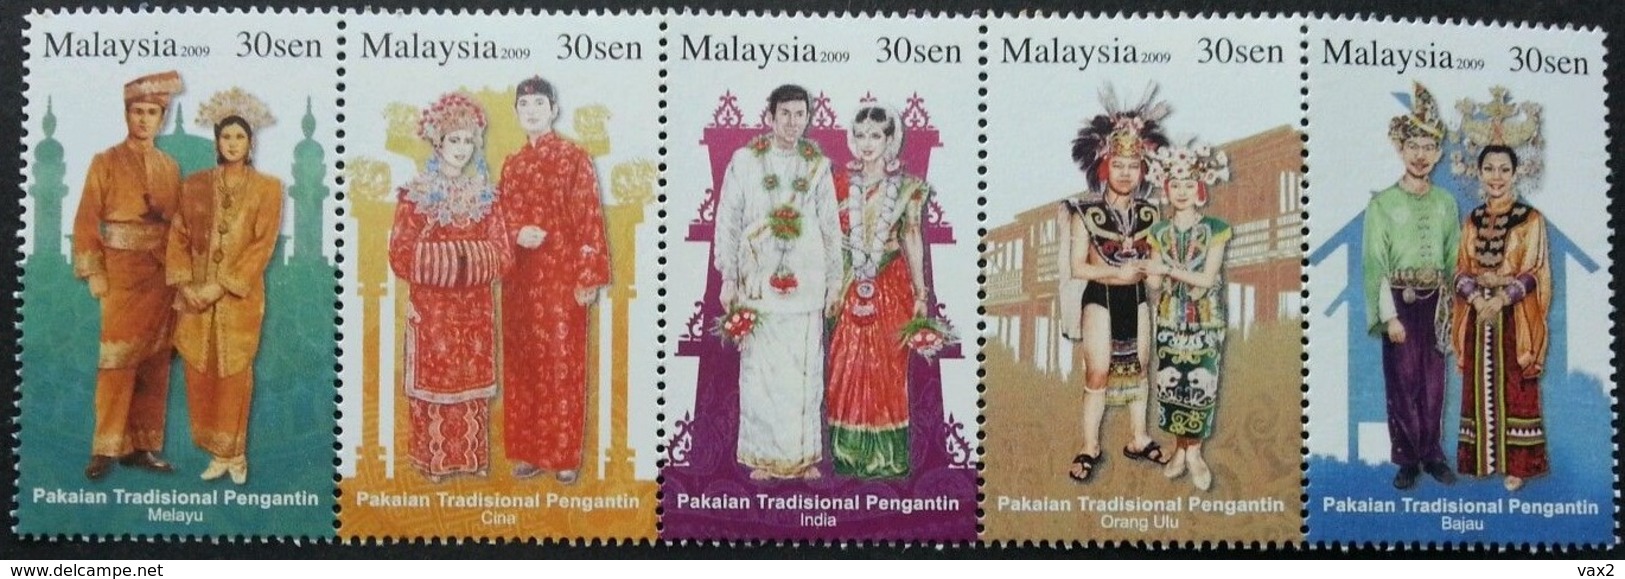 Malaysia 2009 S#1236 Traditional Wedding Costumes Booklet Stamp MNH Culture Costume - Malaysia (1964-...)